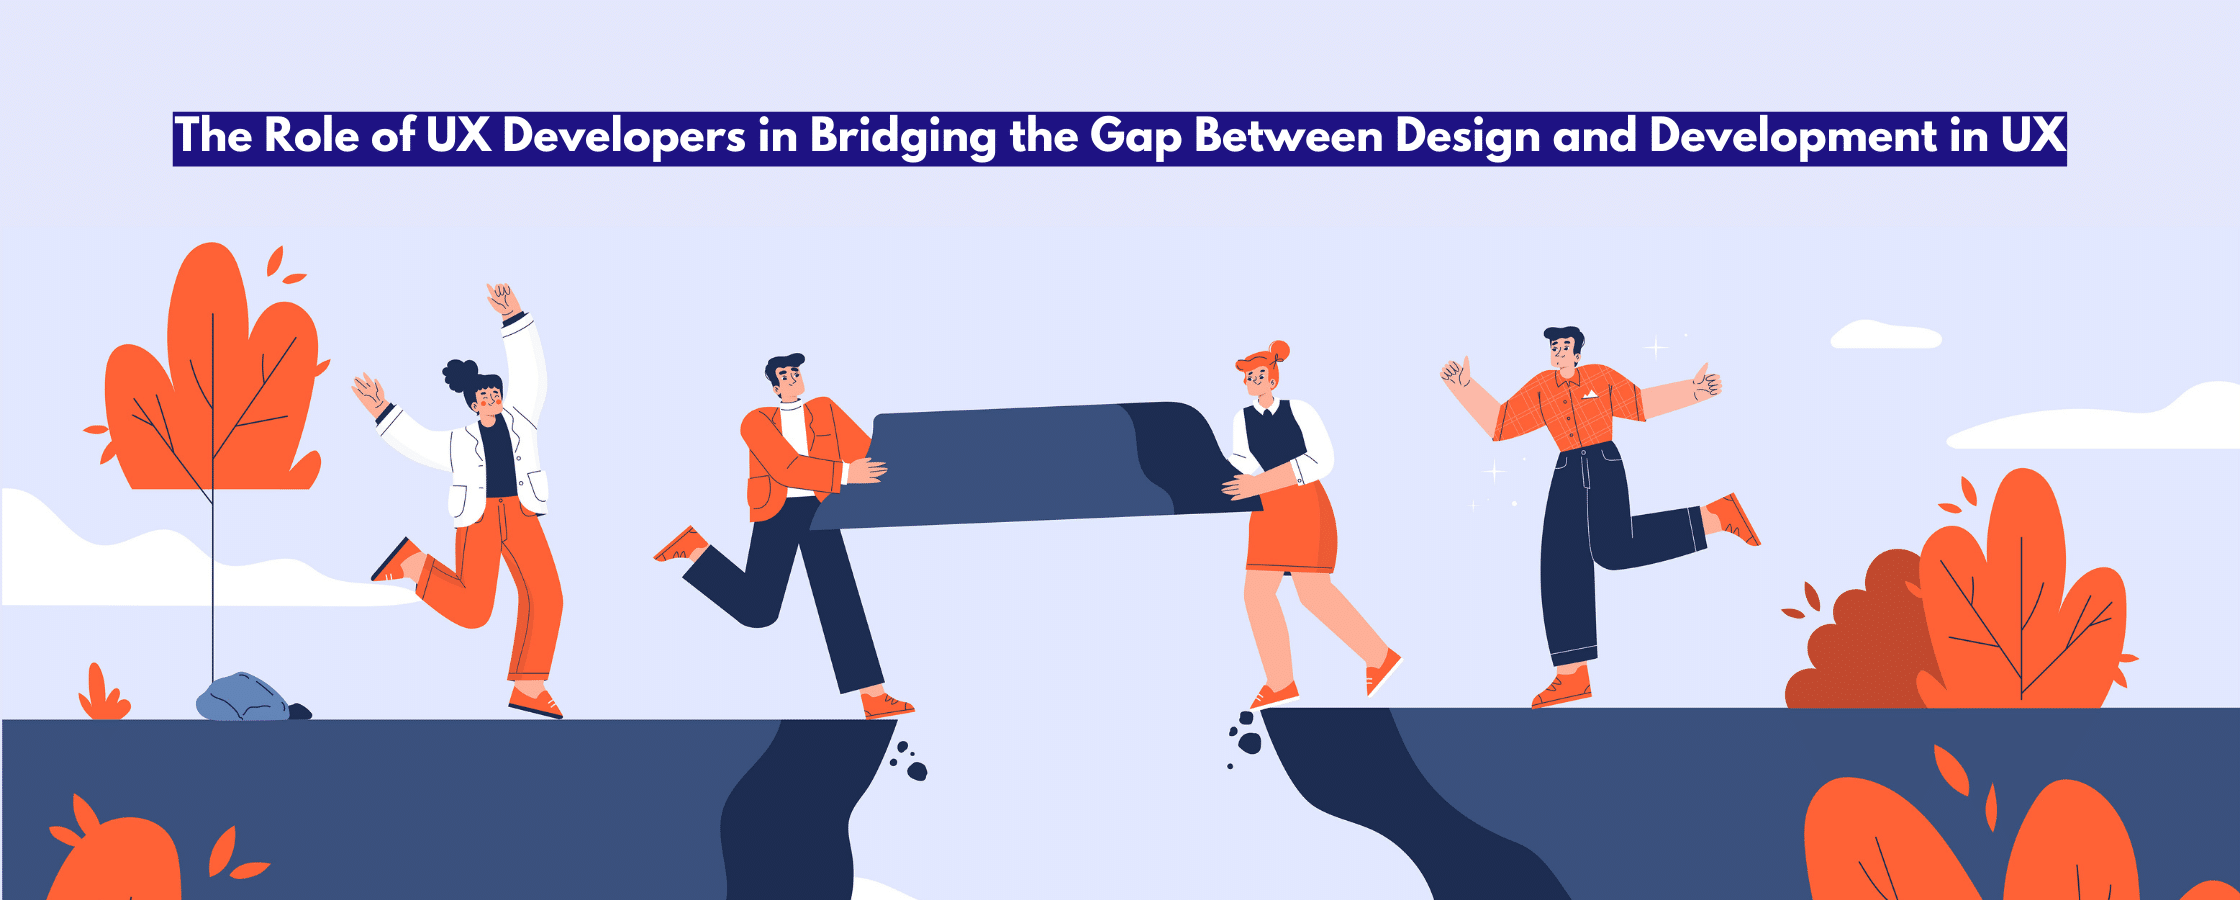 Bridging the gap with text 'The Role of UX Developers in Bridging the Gap Between Design and Development in UX'